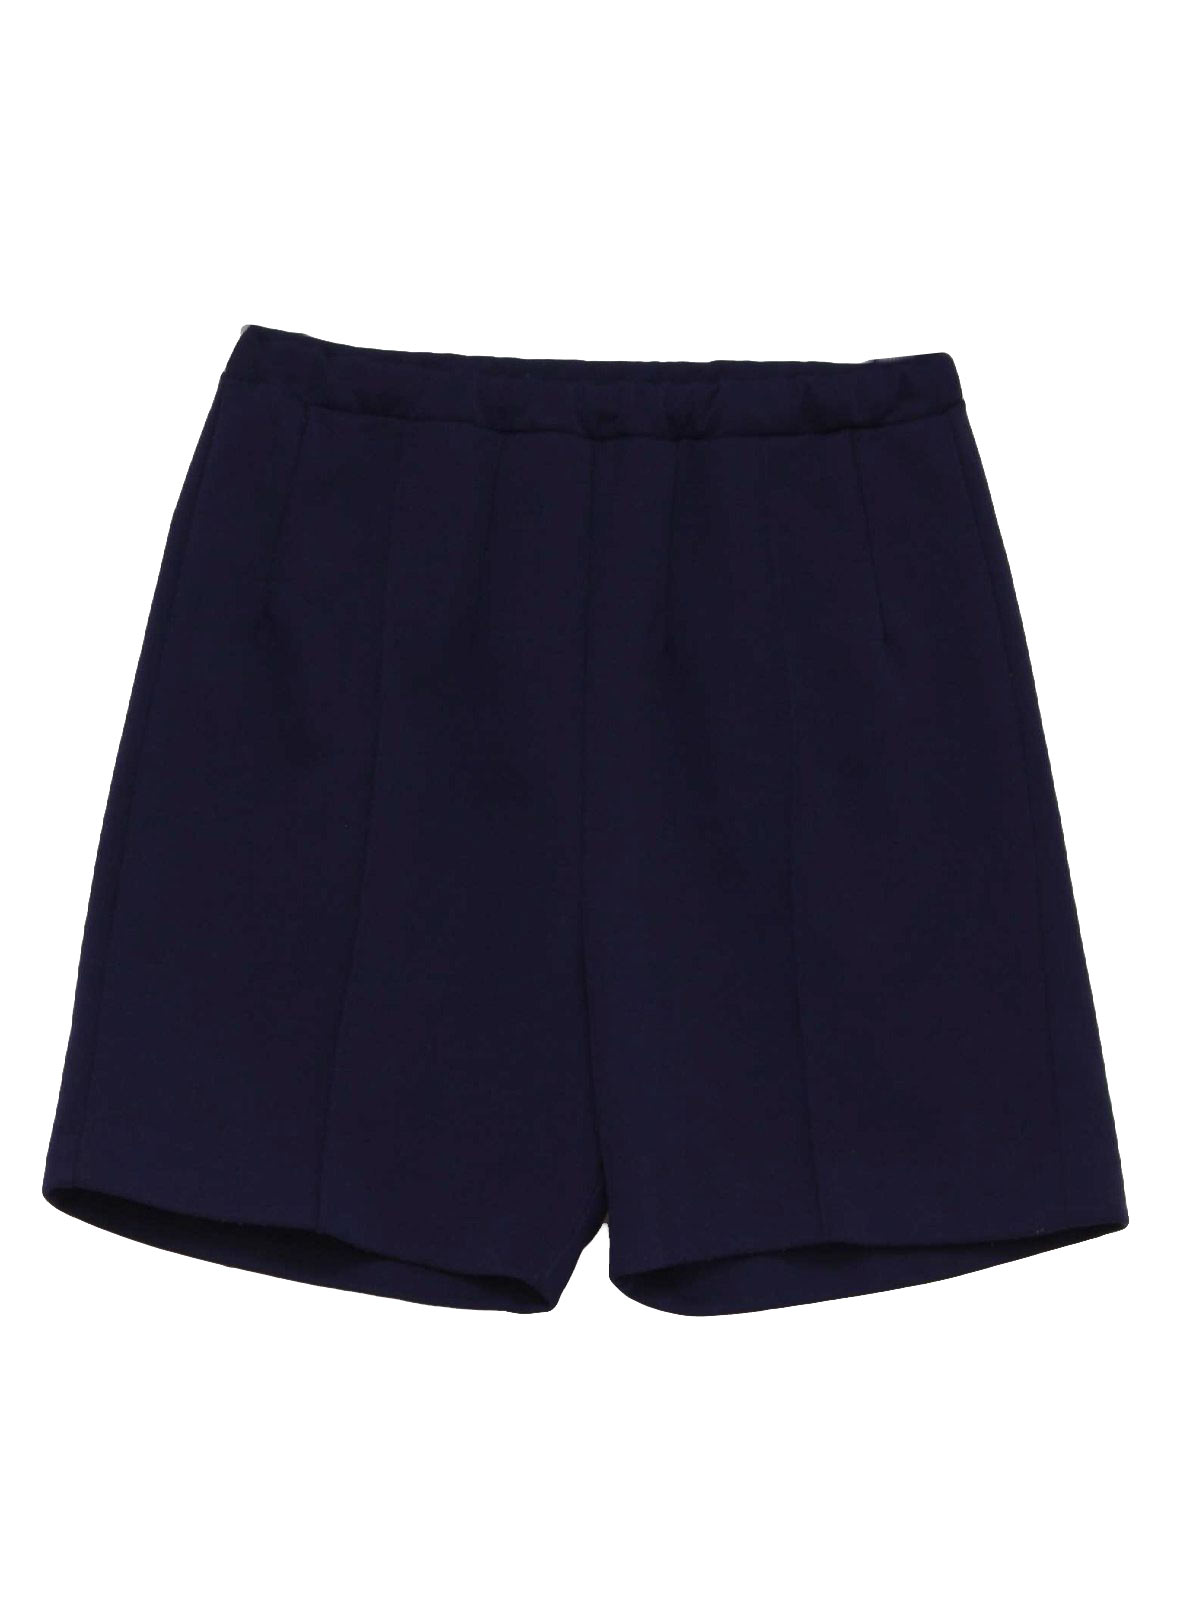 Sixties Shorts: 60s -No Label- Womens navy blue flat-textured polyester ...